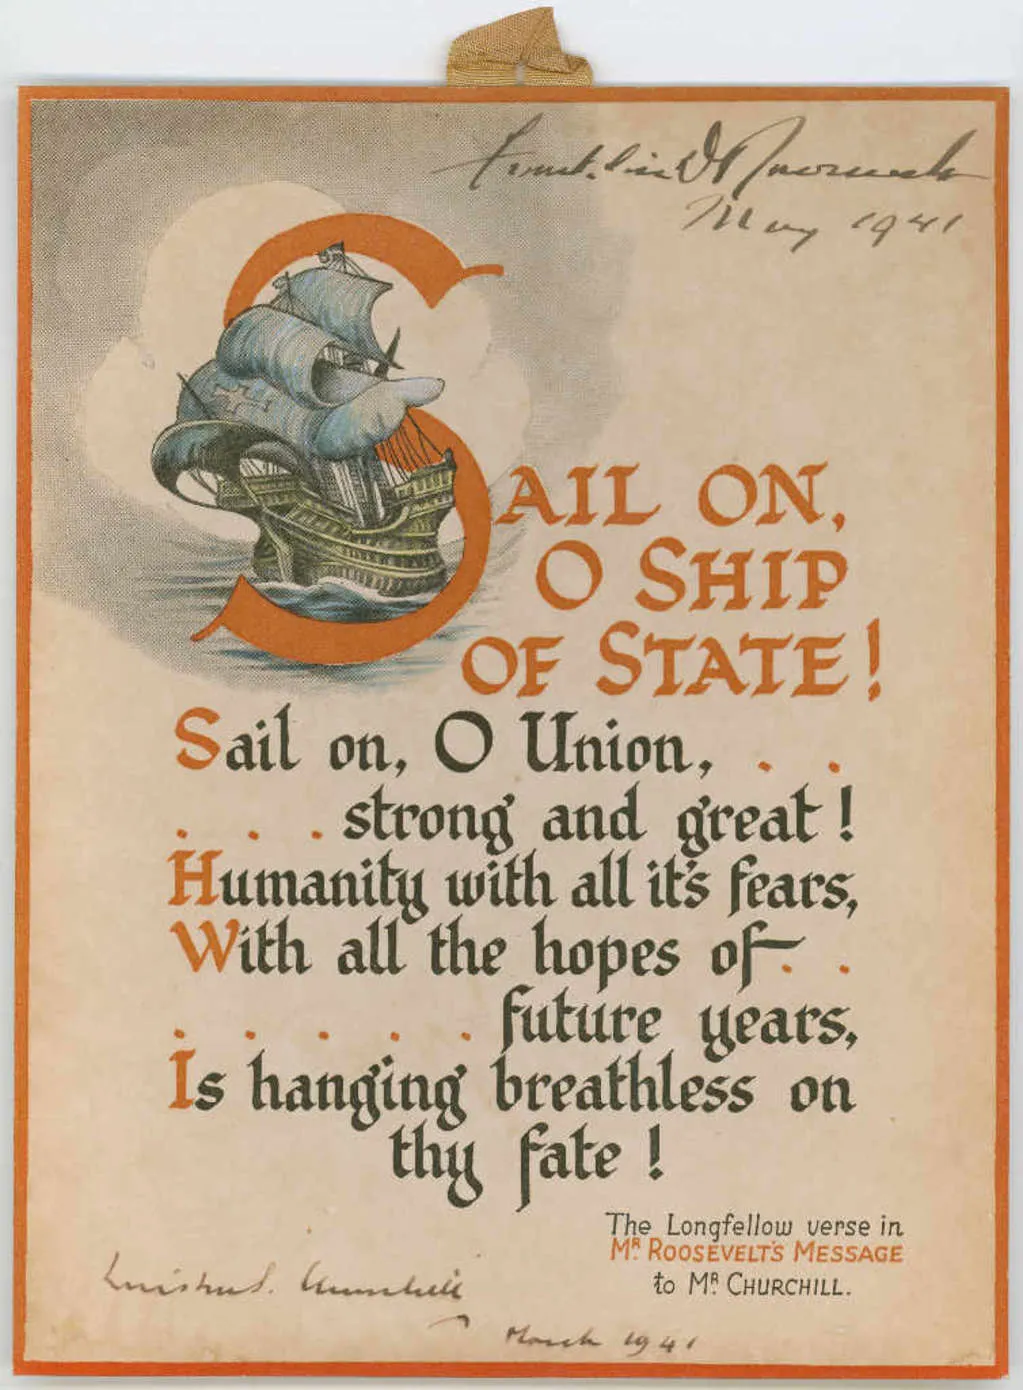 A verse of poetry, decorated with a sailing ship and signed by Franklin D Roosevelt and Winston Churchill.